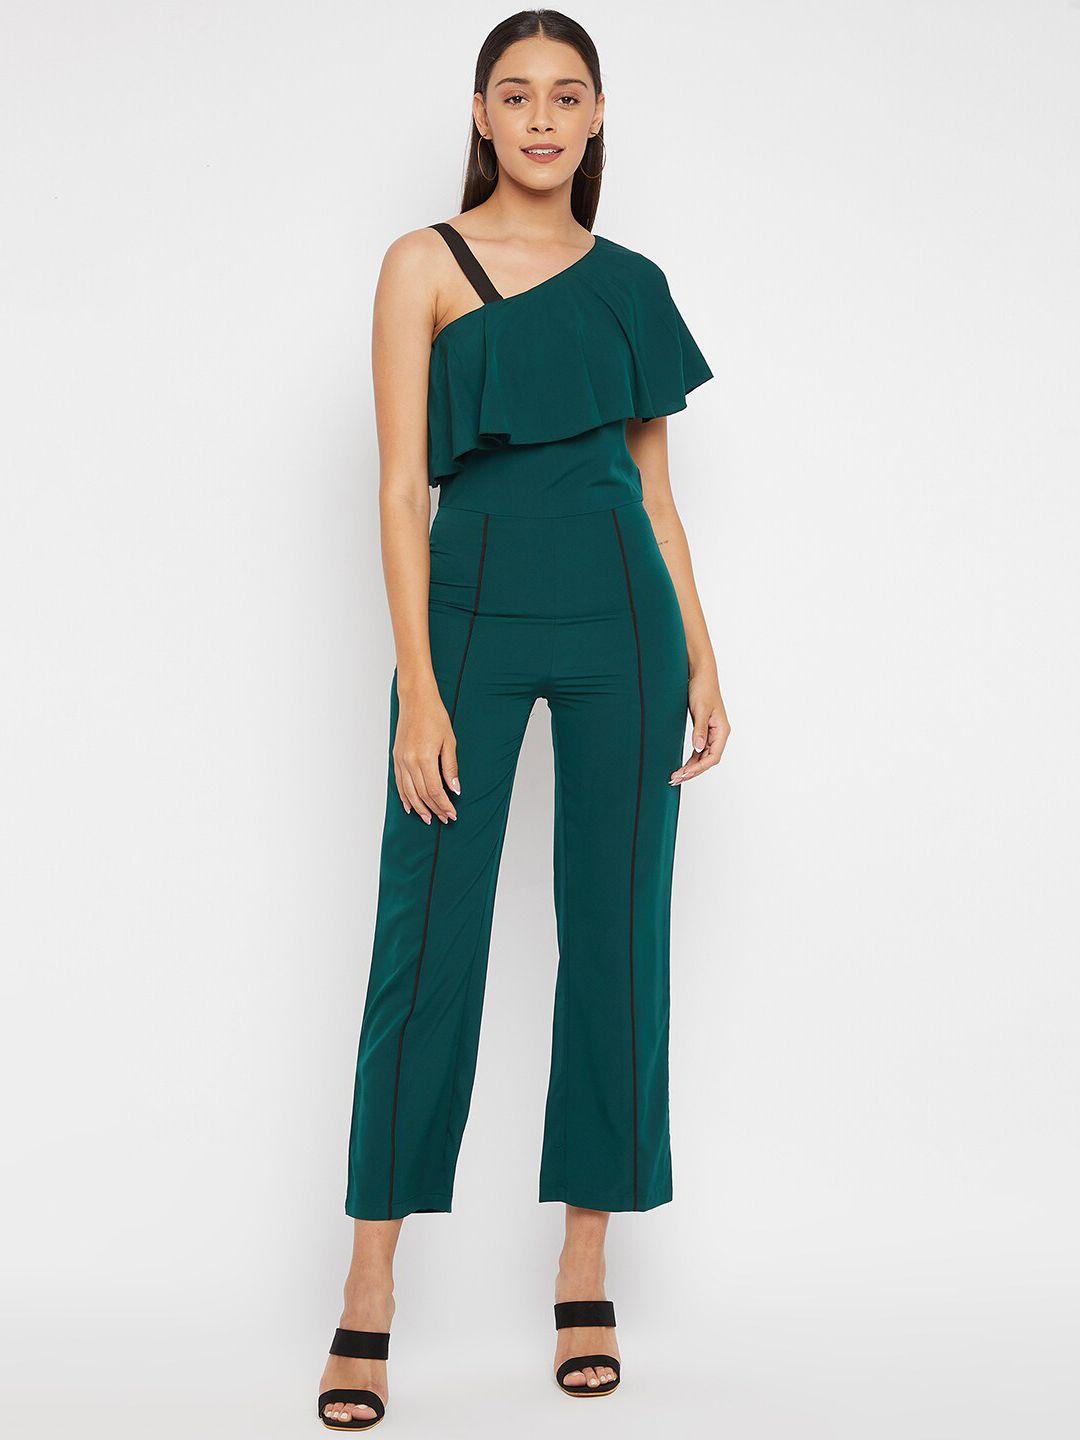 panit green basic jumpsuit with ruffles